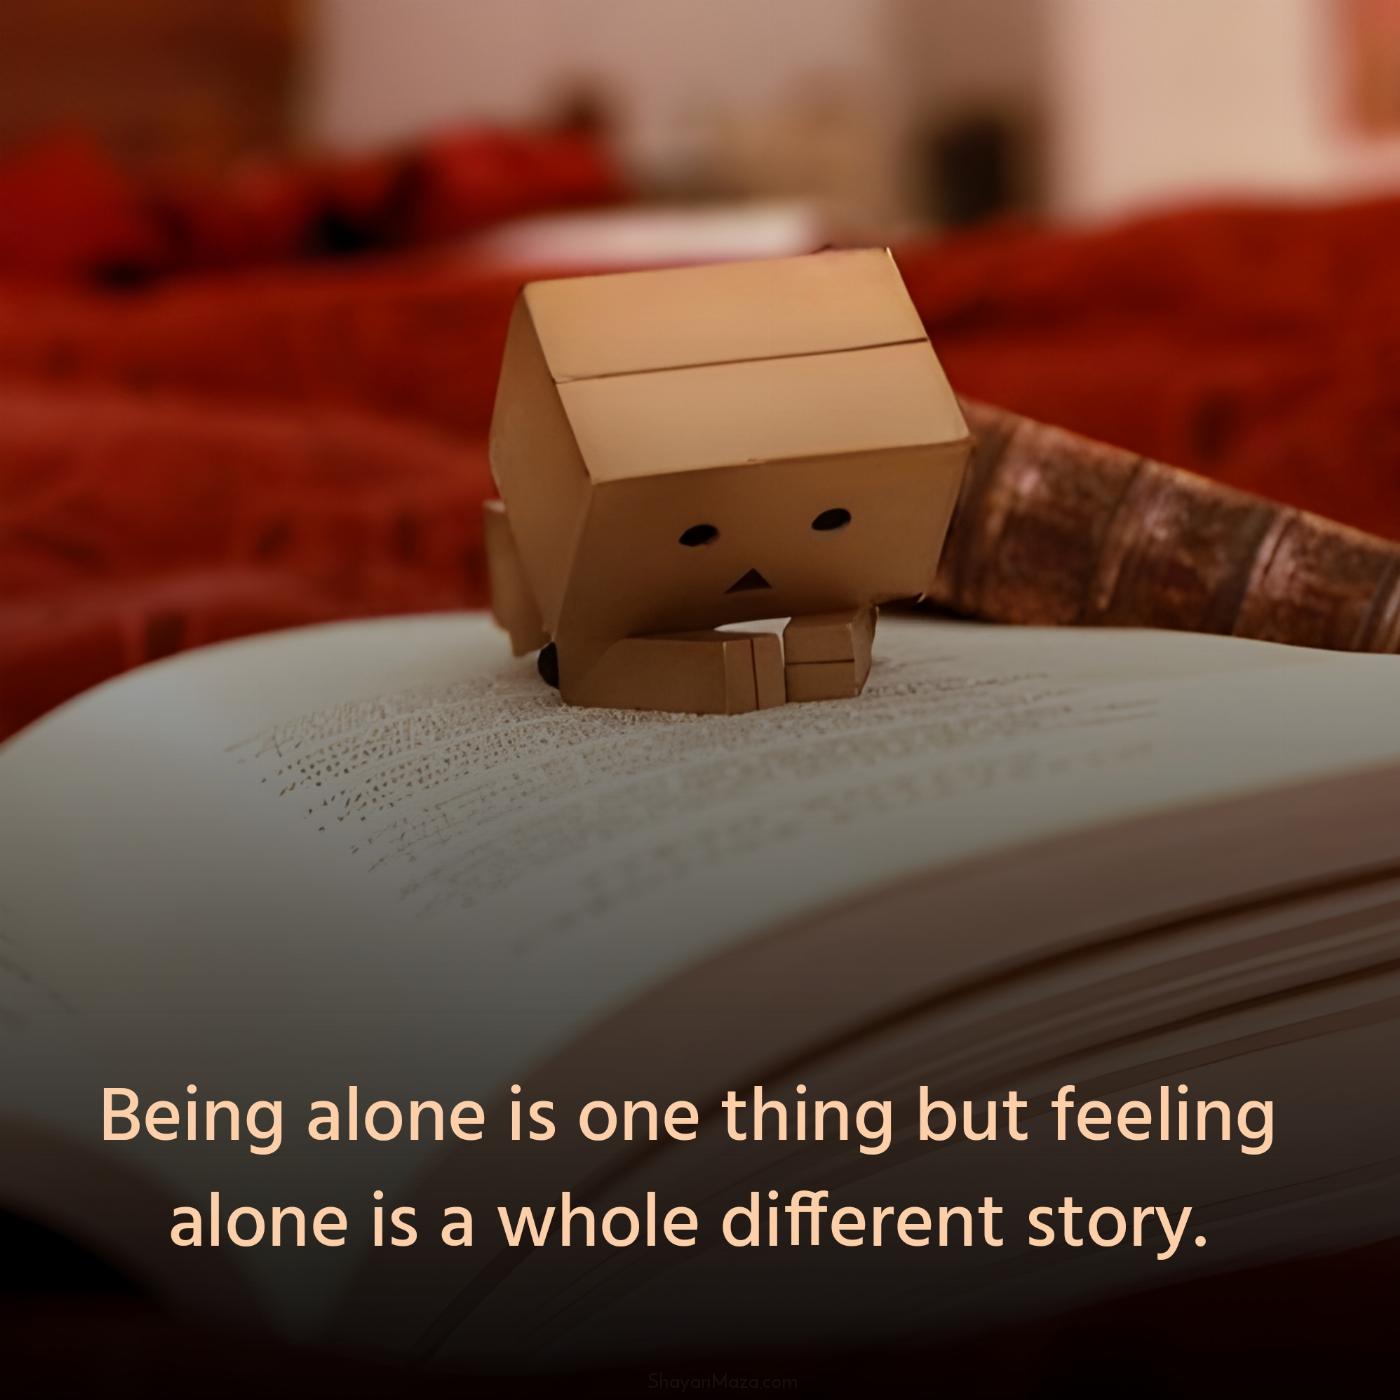 Being alone is one thing but feeling alone is a whole different story